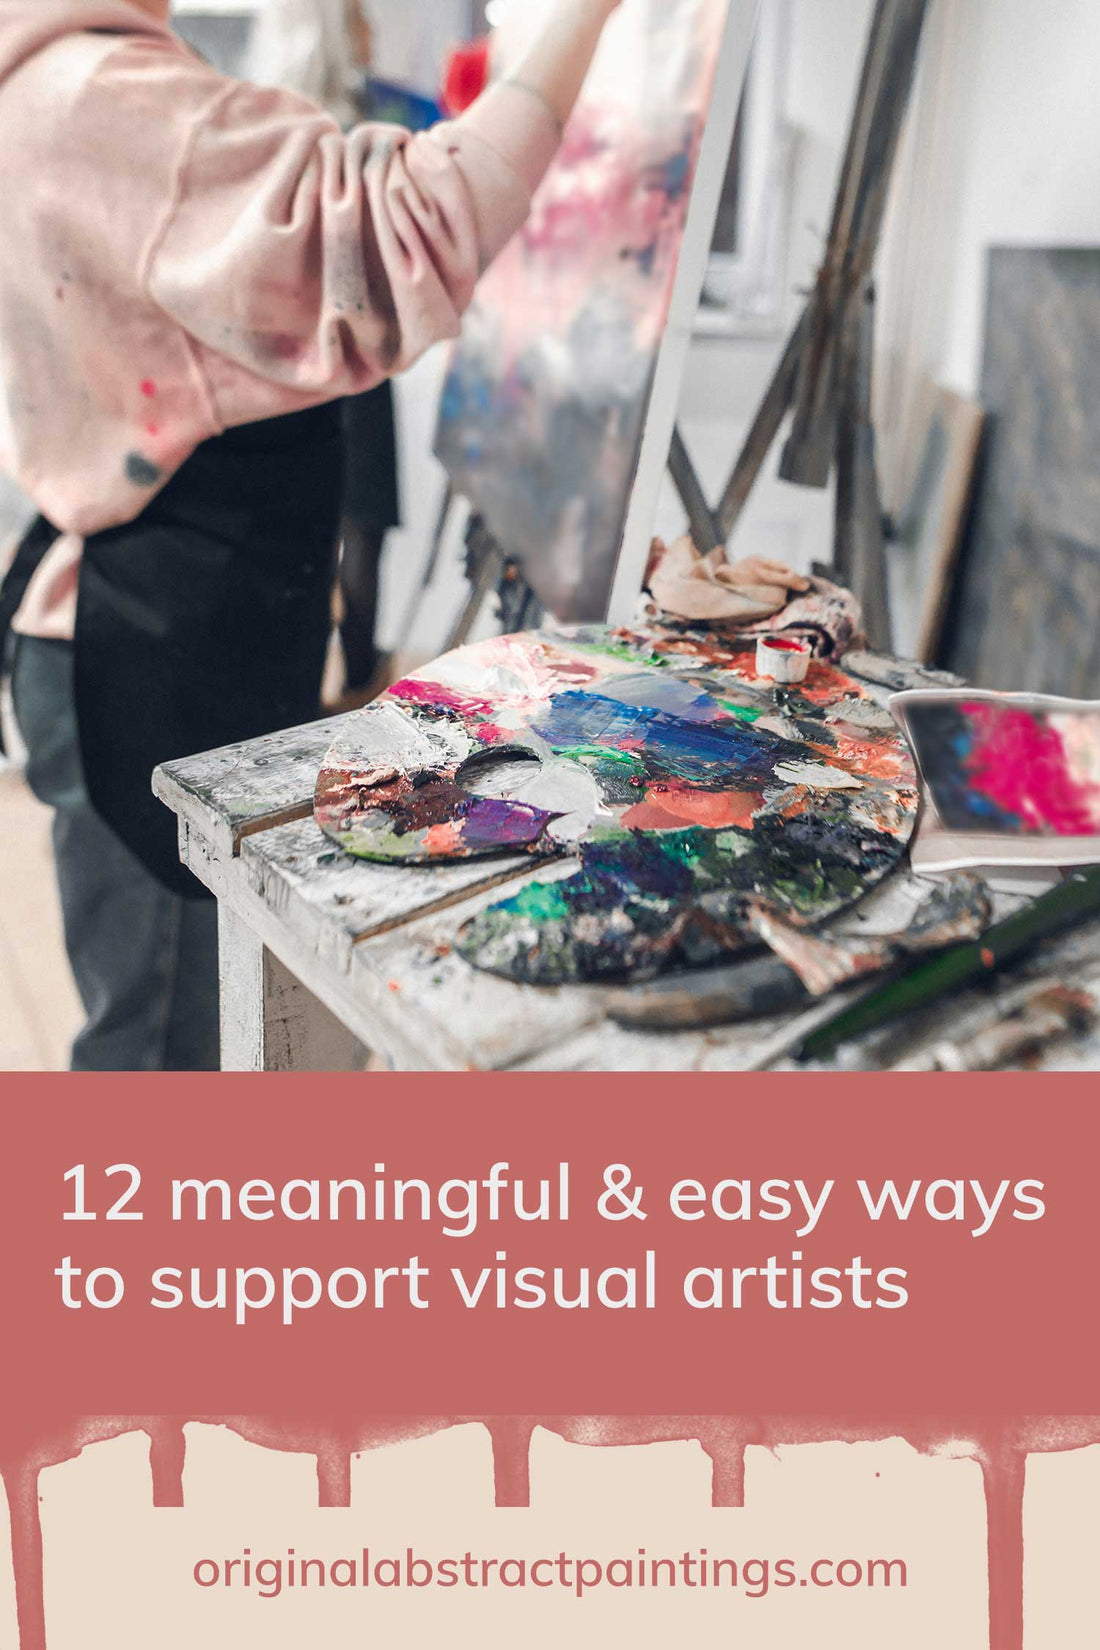 12 meaningful & easy ways to support visual artists